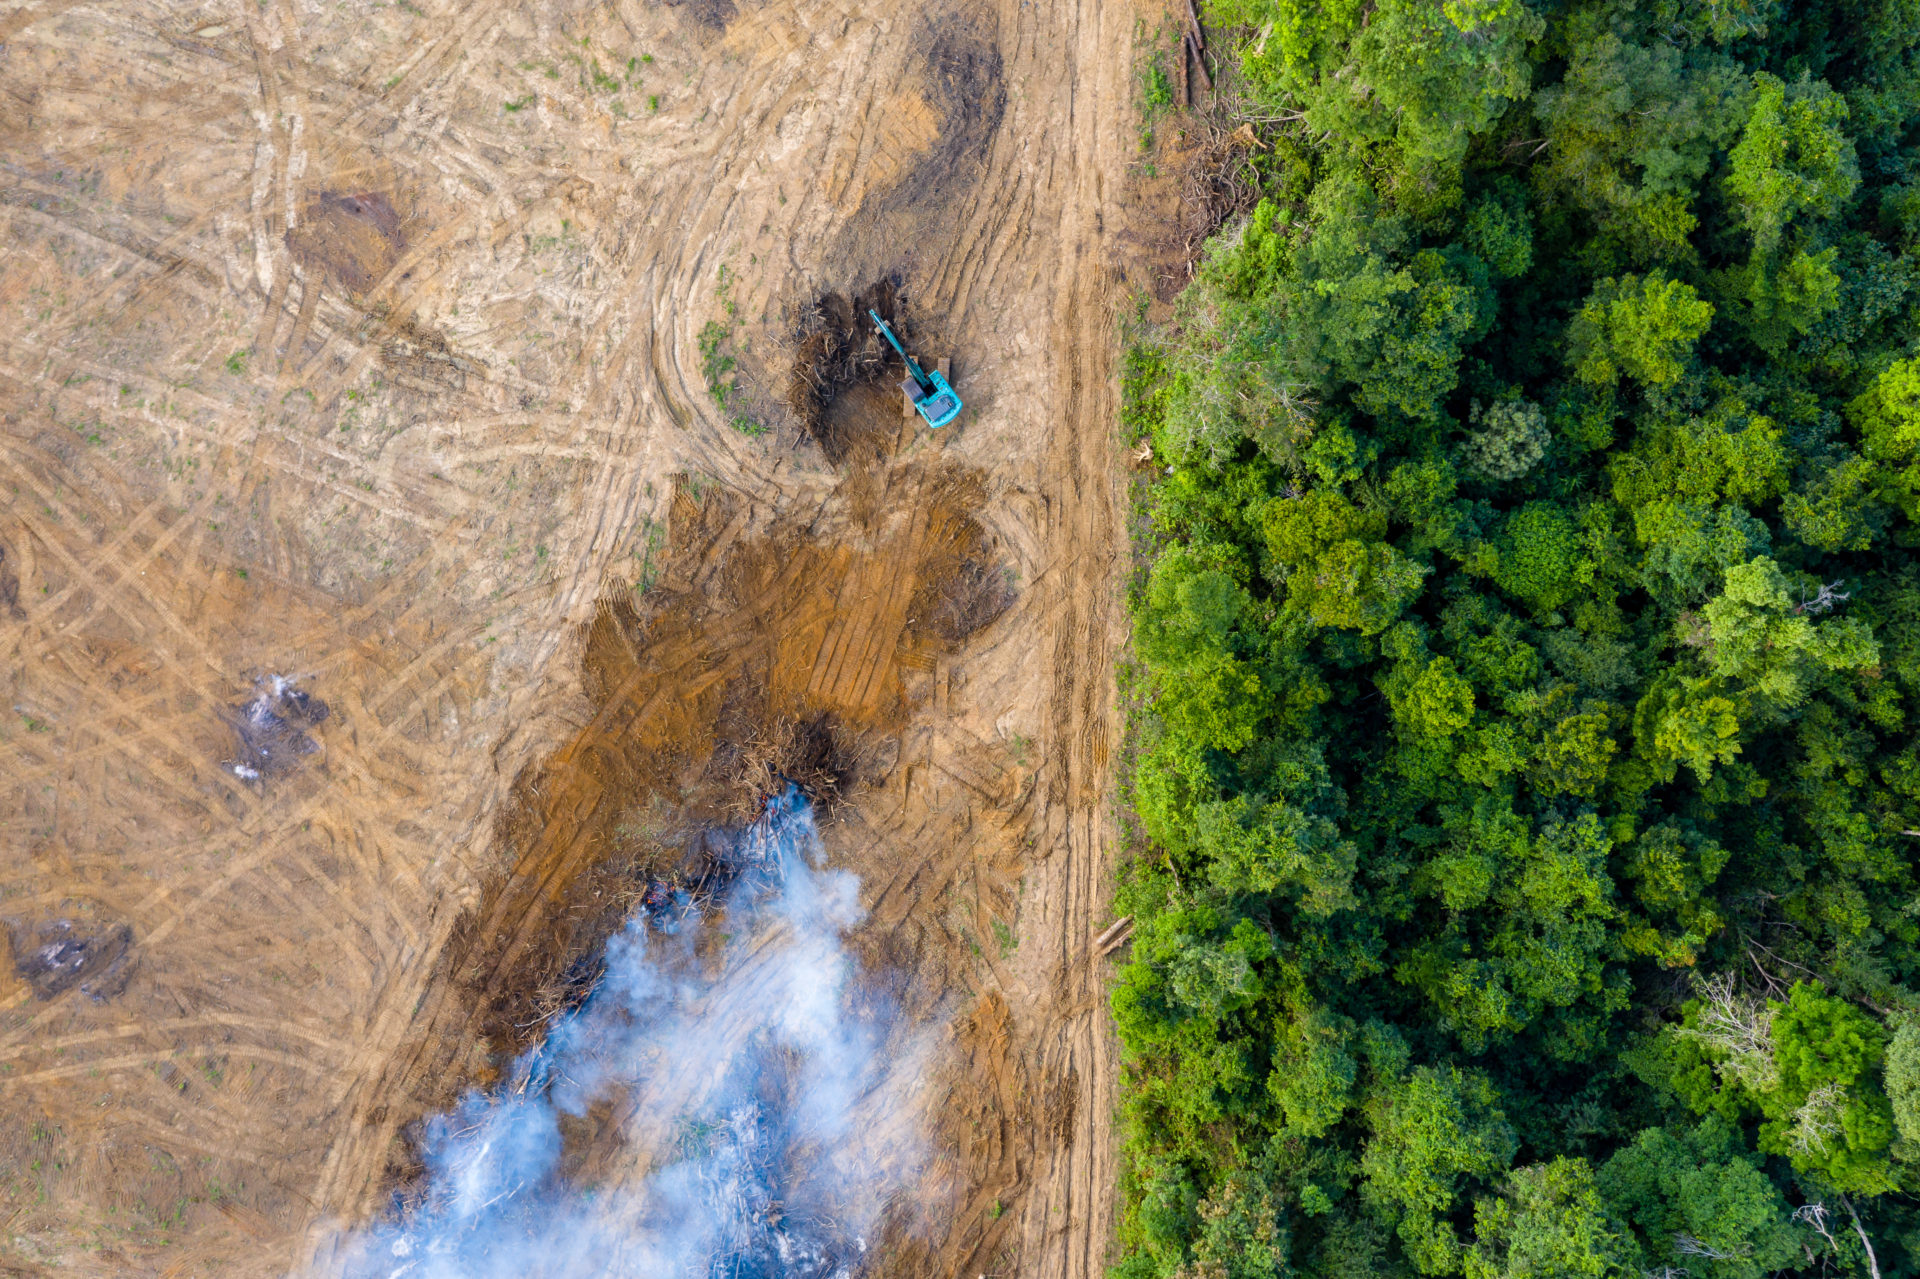 Aerial View Of Deforestation. Rainforest Being Removed To Make Way For Palm Oil And Rubber Plantations. Adobe Photos